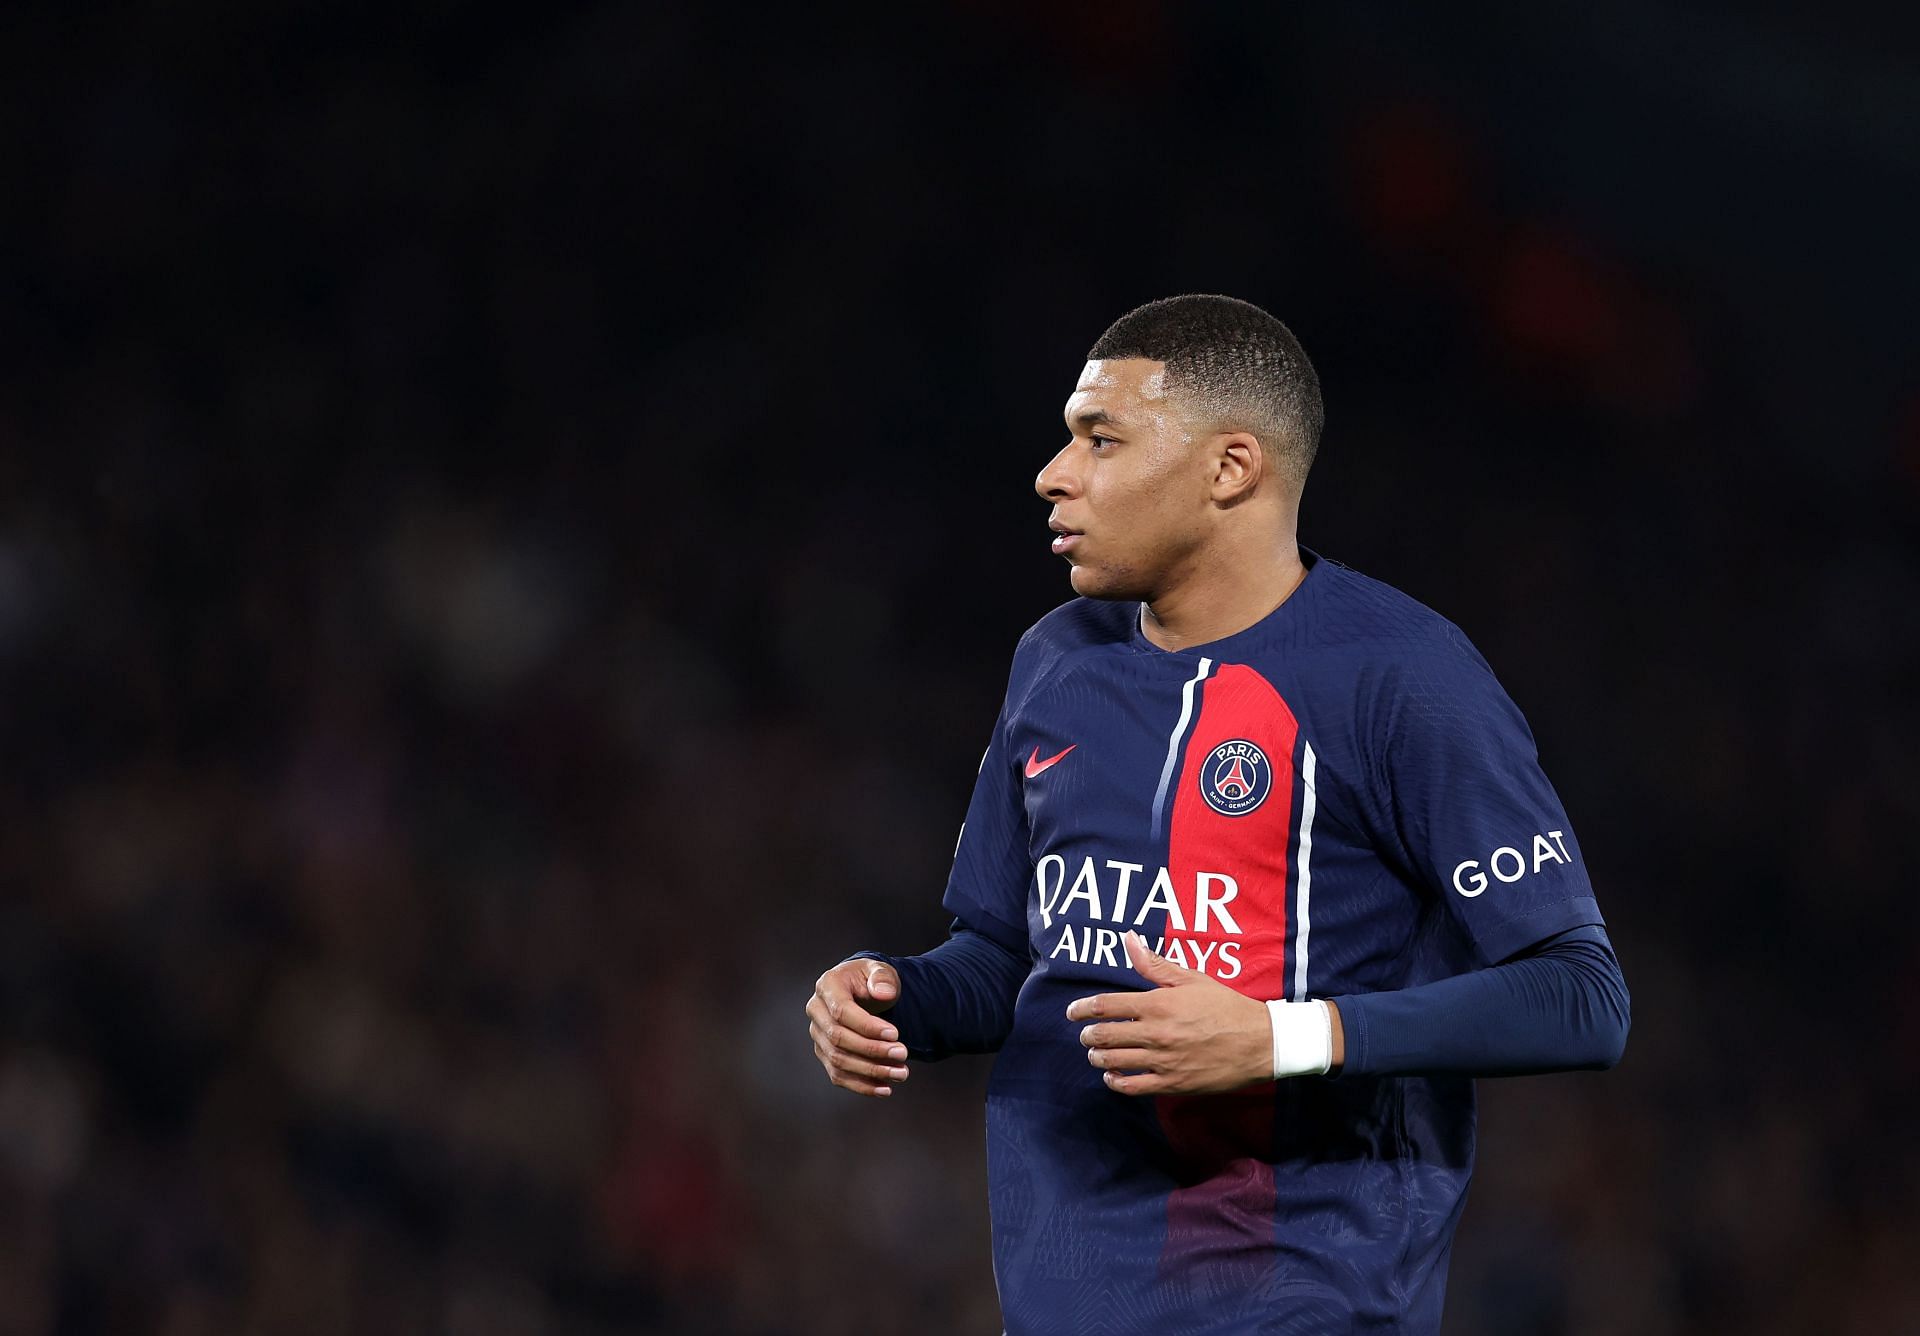 Kylian Mbappe is inching closer to his dream move to the Santiago Bernabeu.